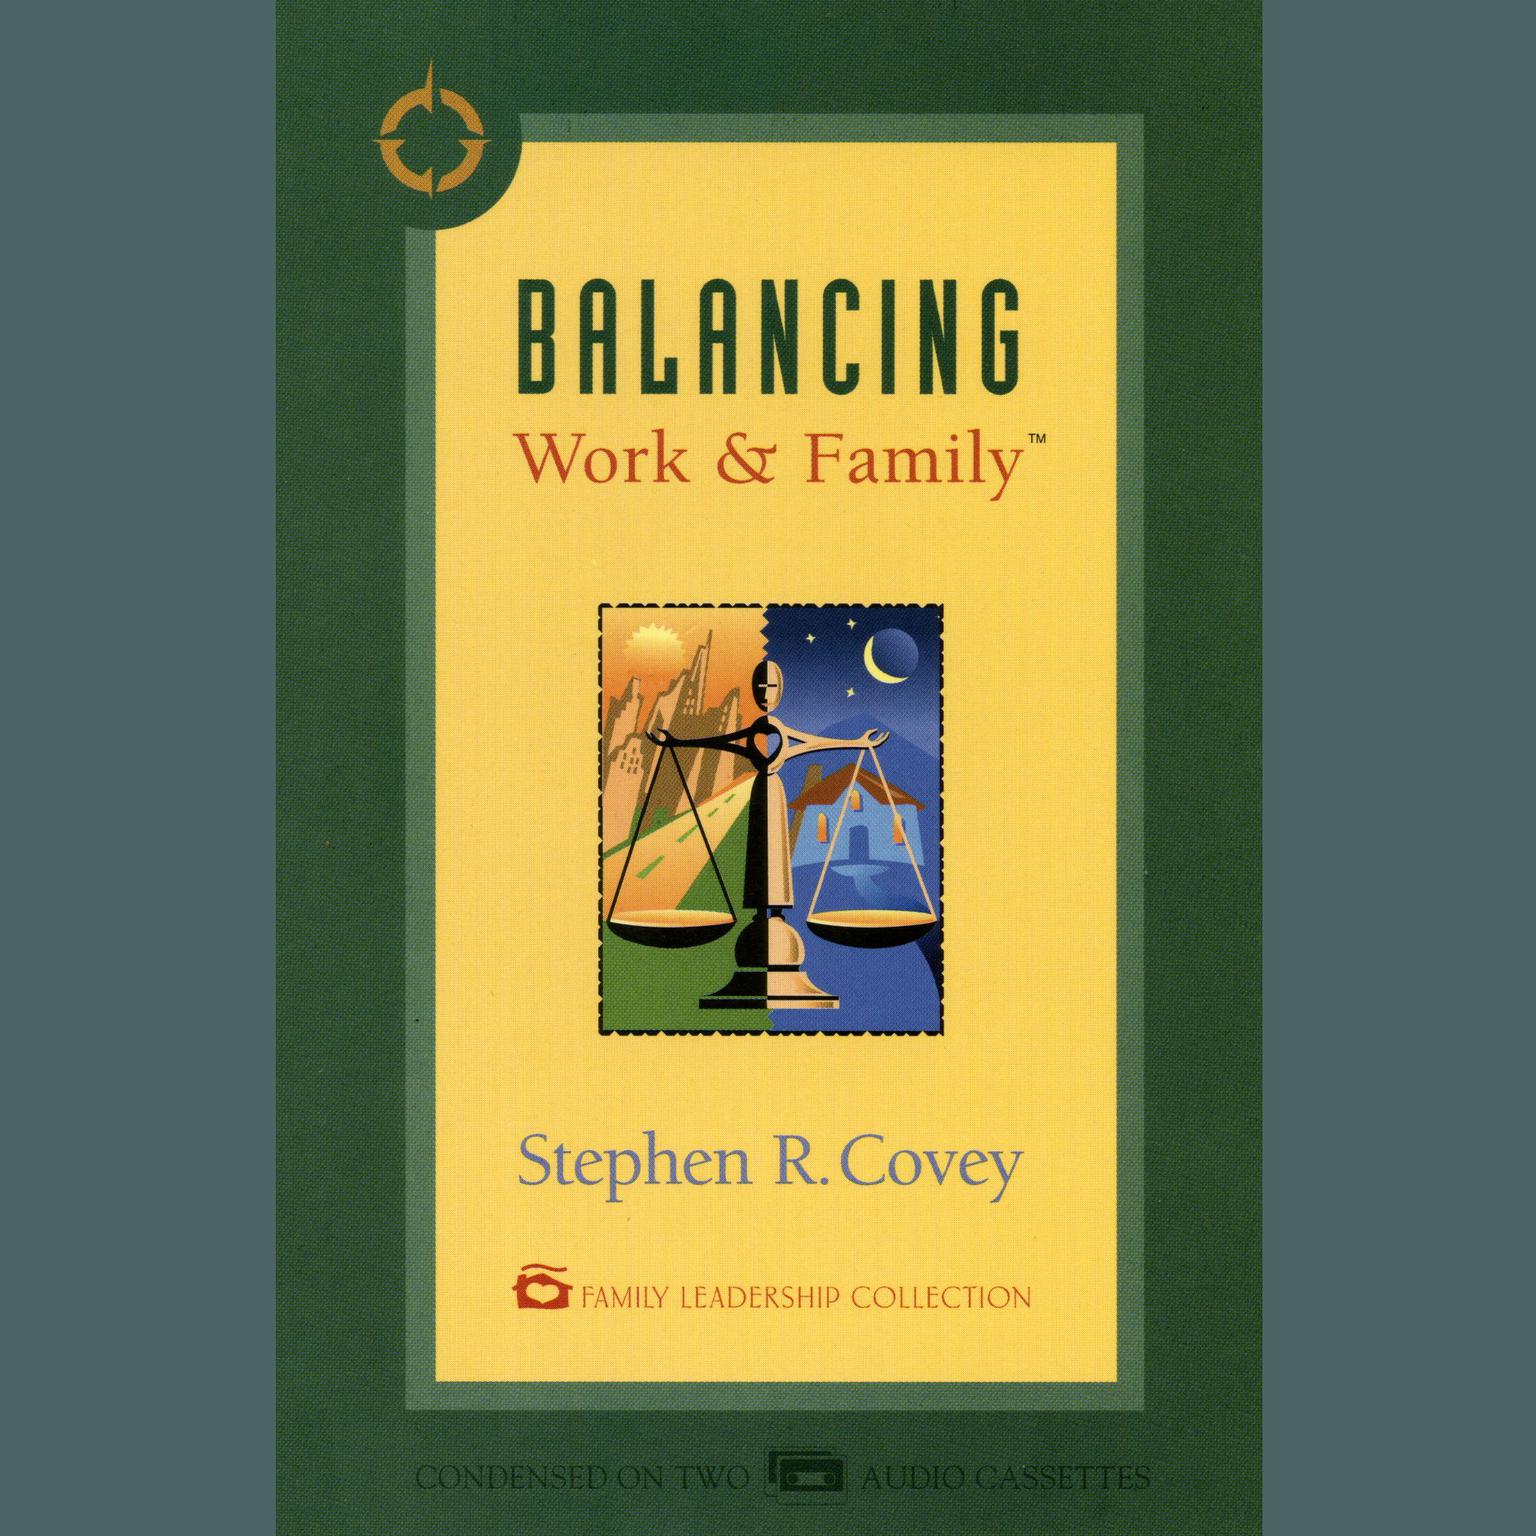 Balancing Work & Family (Abridged) Audiobook, by Stephen R. Covey